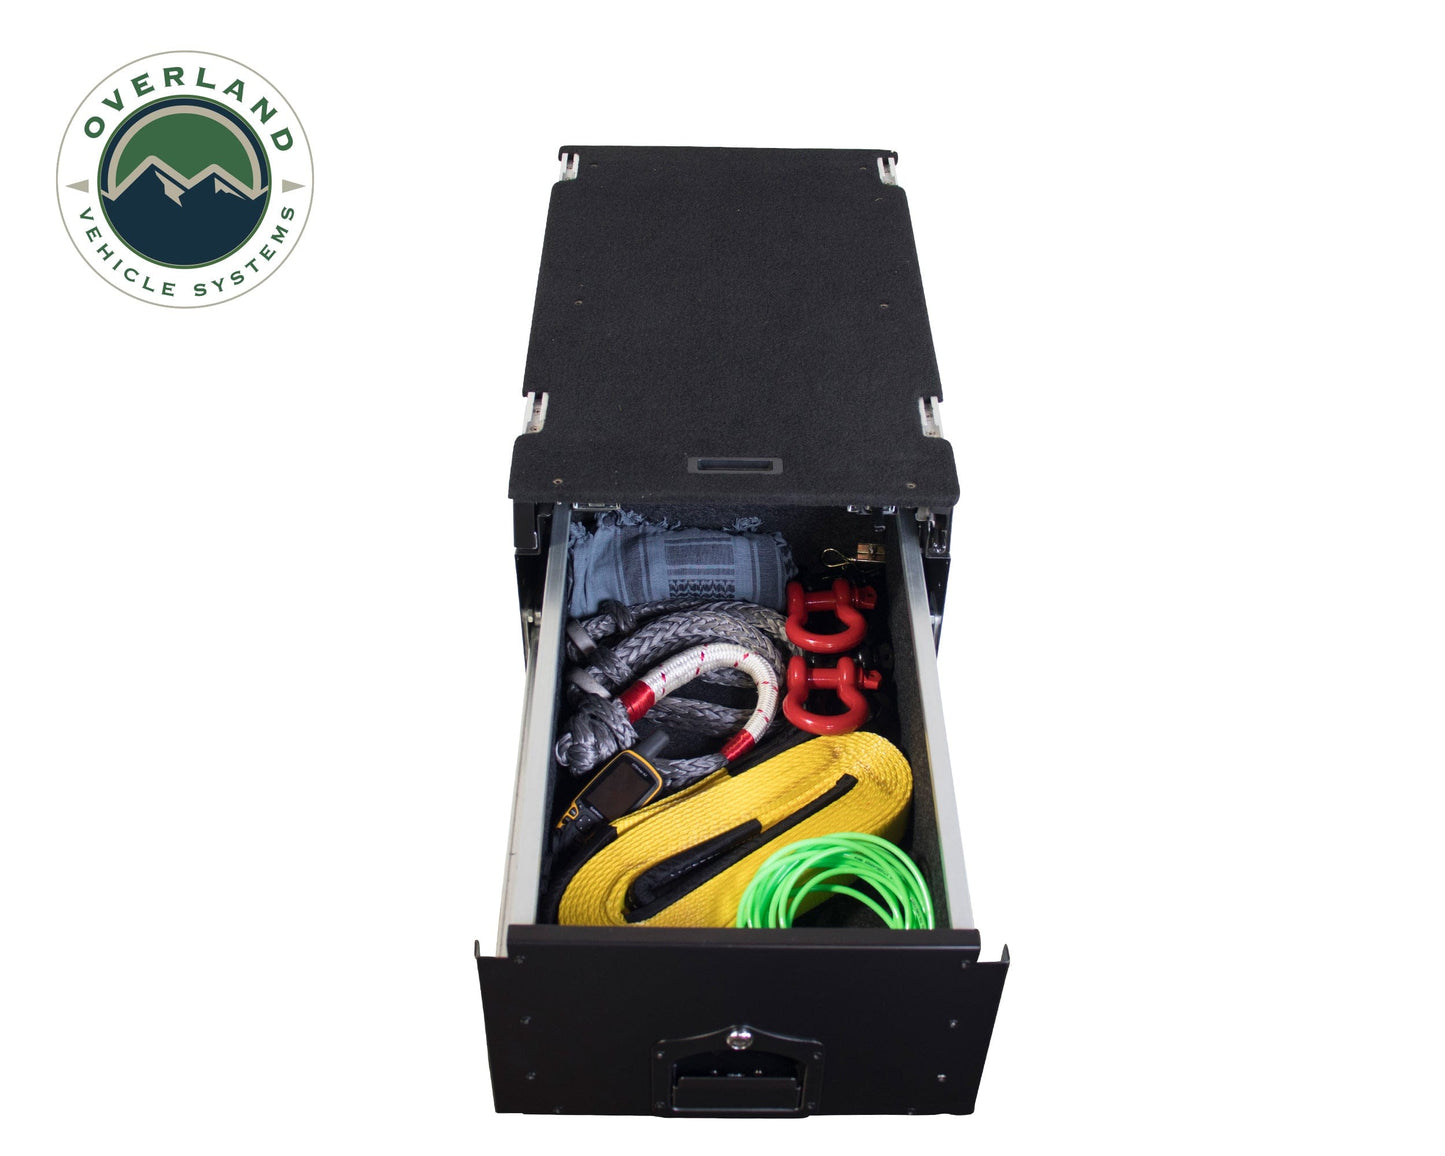 Overland Vehicle Systems Overland Vehicle Systems Cargo Box With Slide Out Drawer & Working Station Size